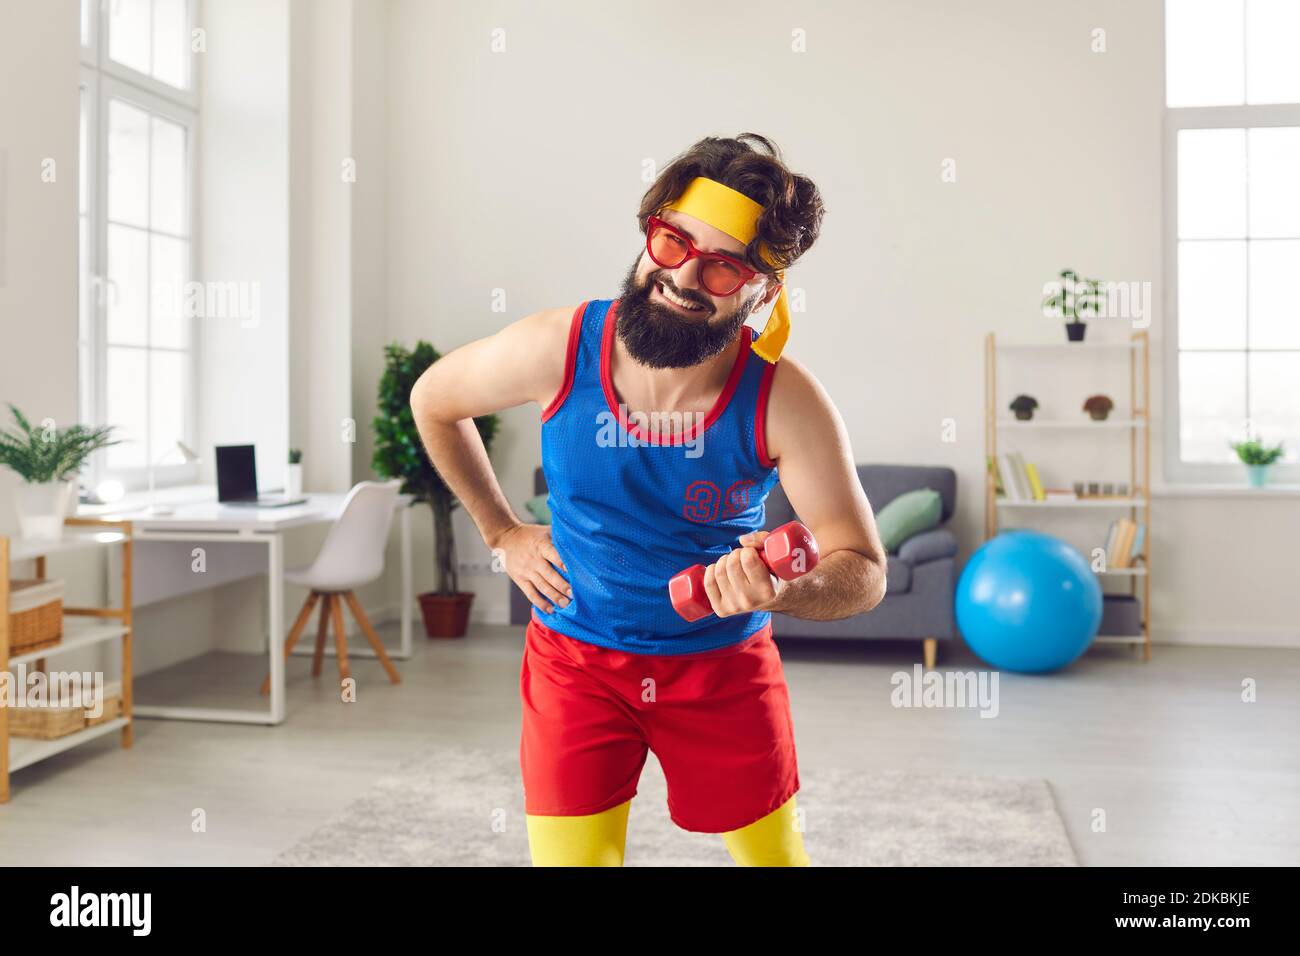 Funny and hardy man in colorful colored sportswear doing sports workout with dumbbells at home. Stock Photo